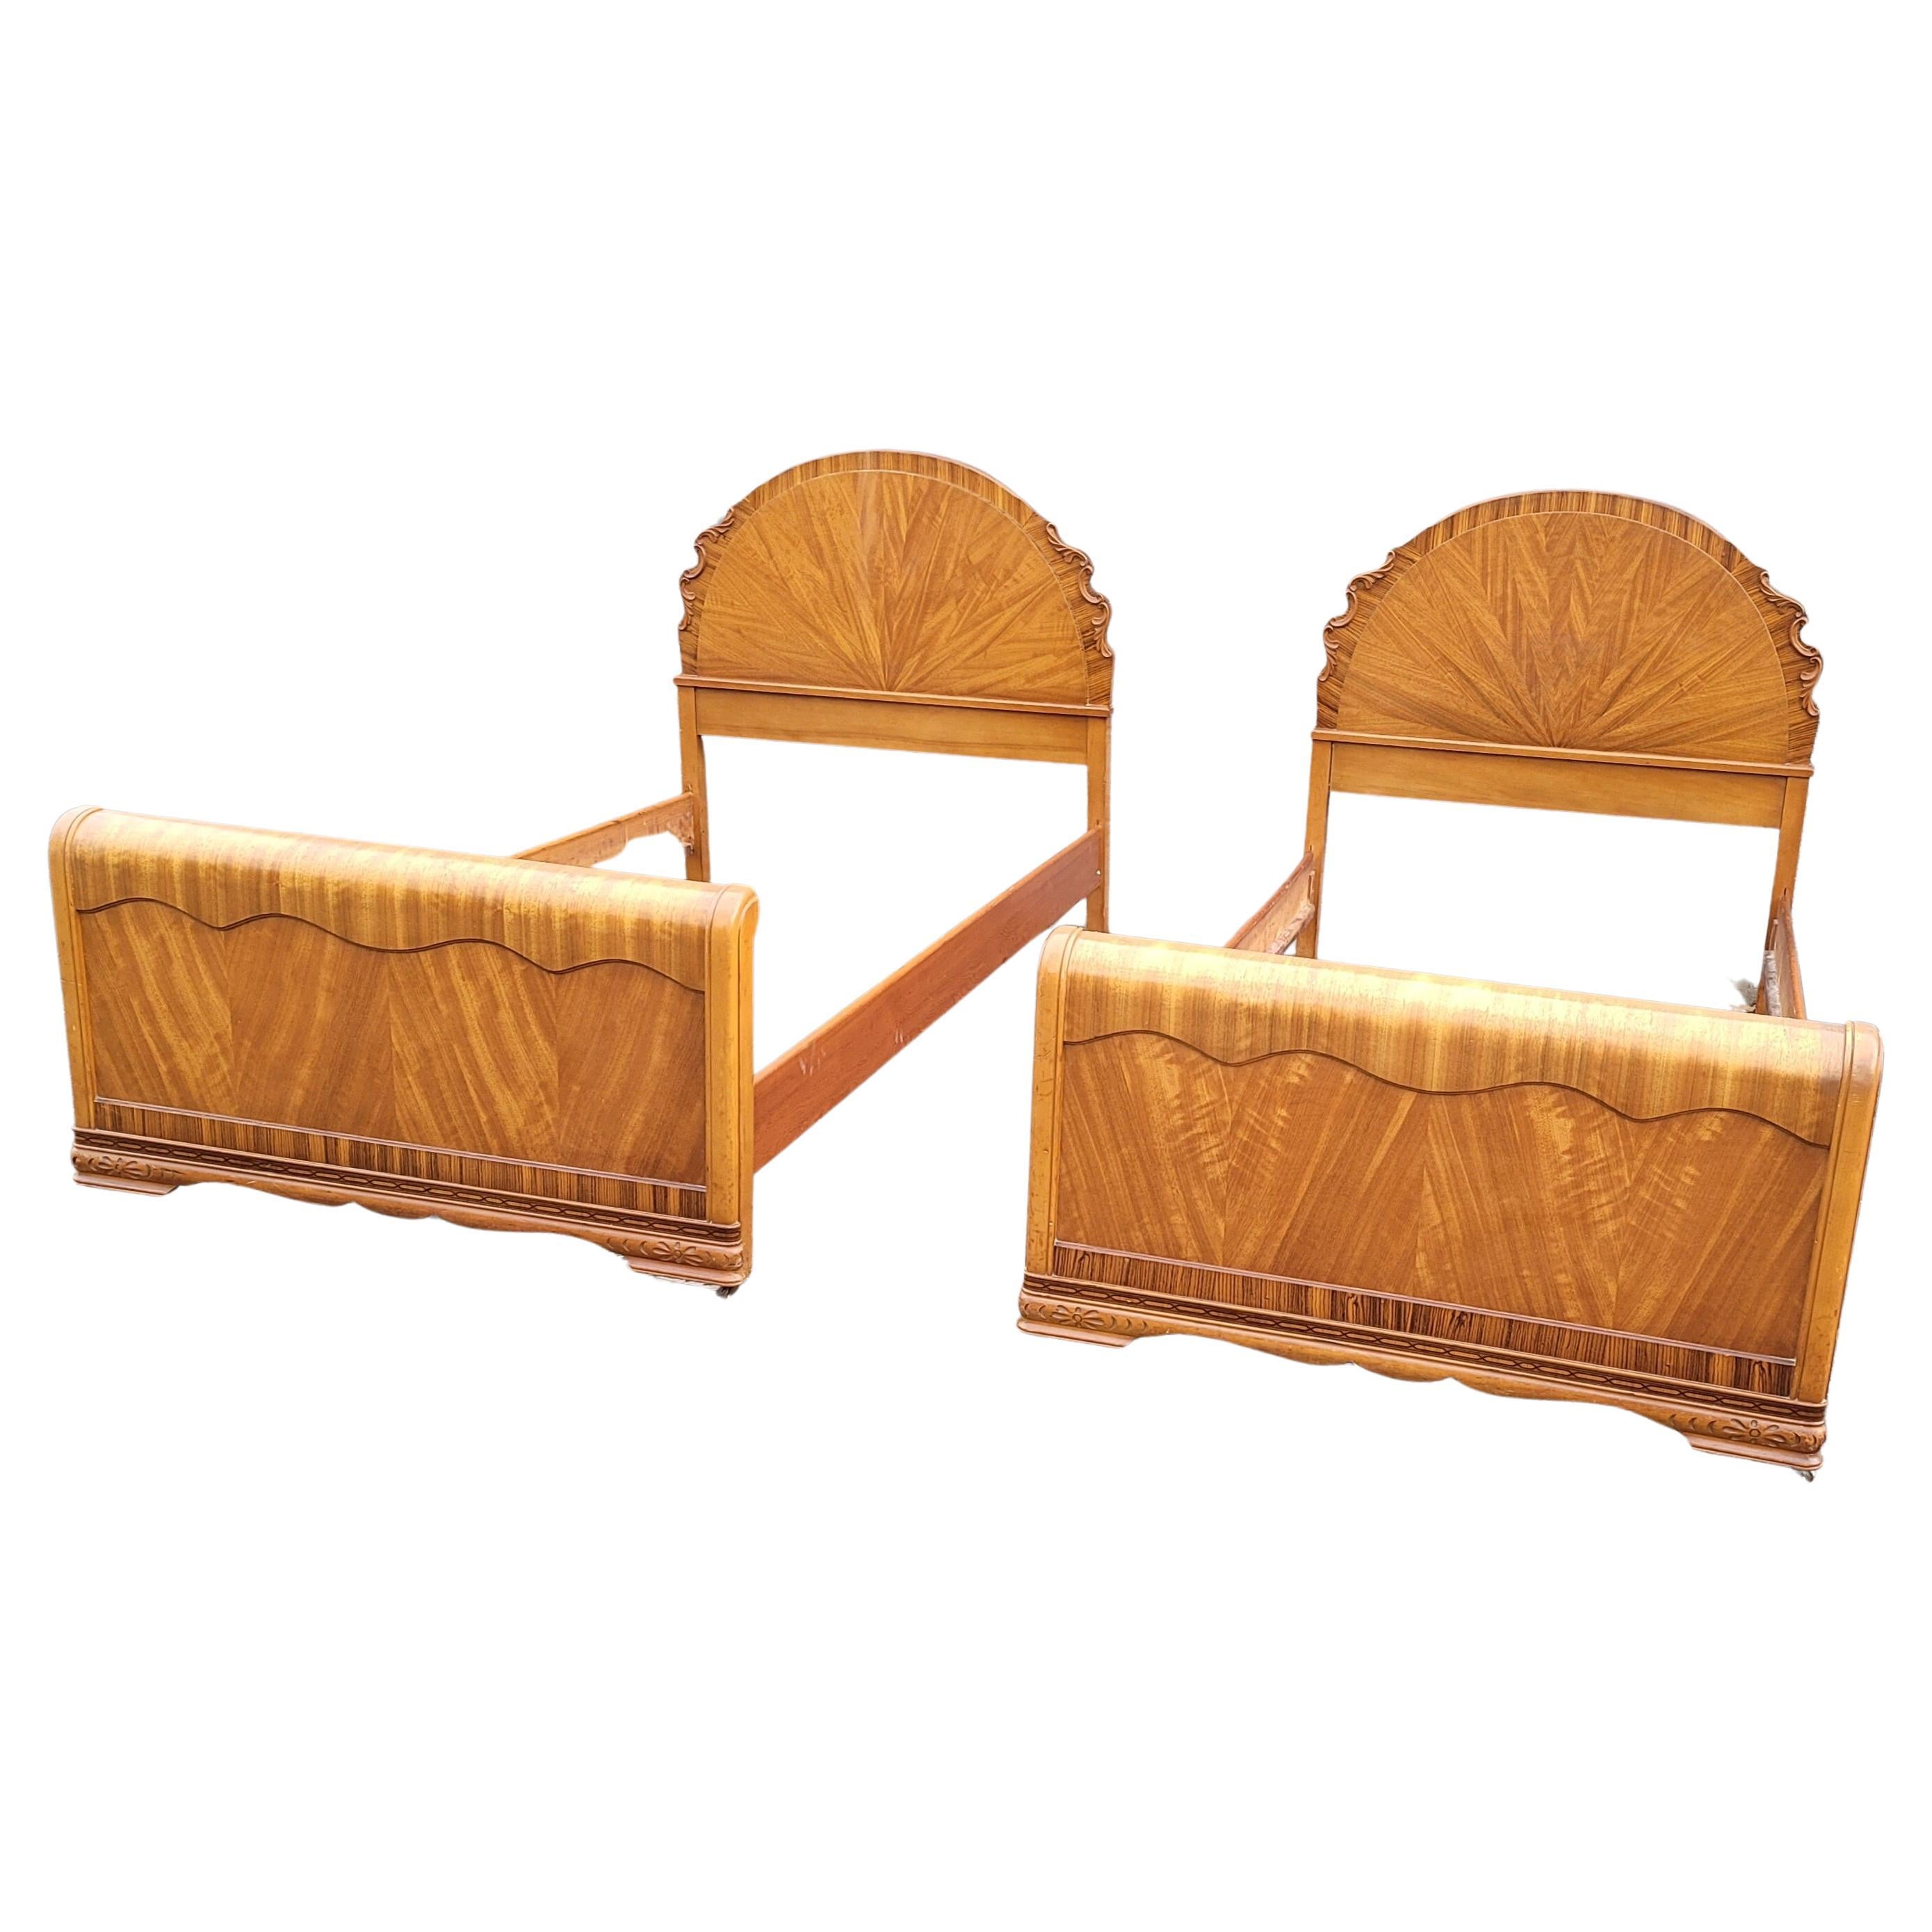 A Pair of 1930s Art Deco Mahogany Twin Size Bedsteads (Walnuss) im Angebot